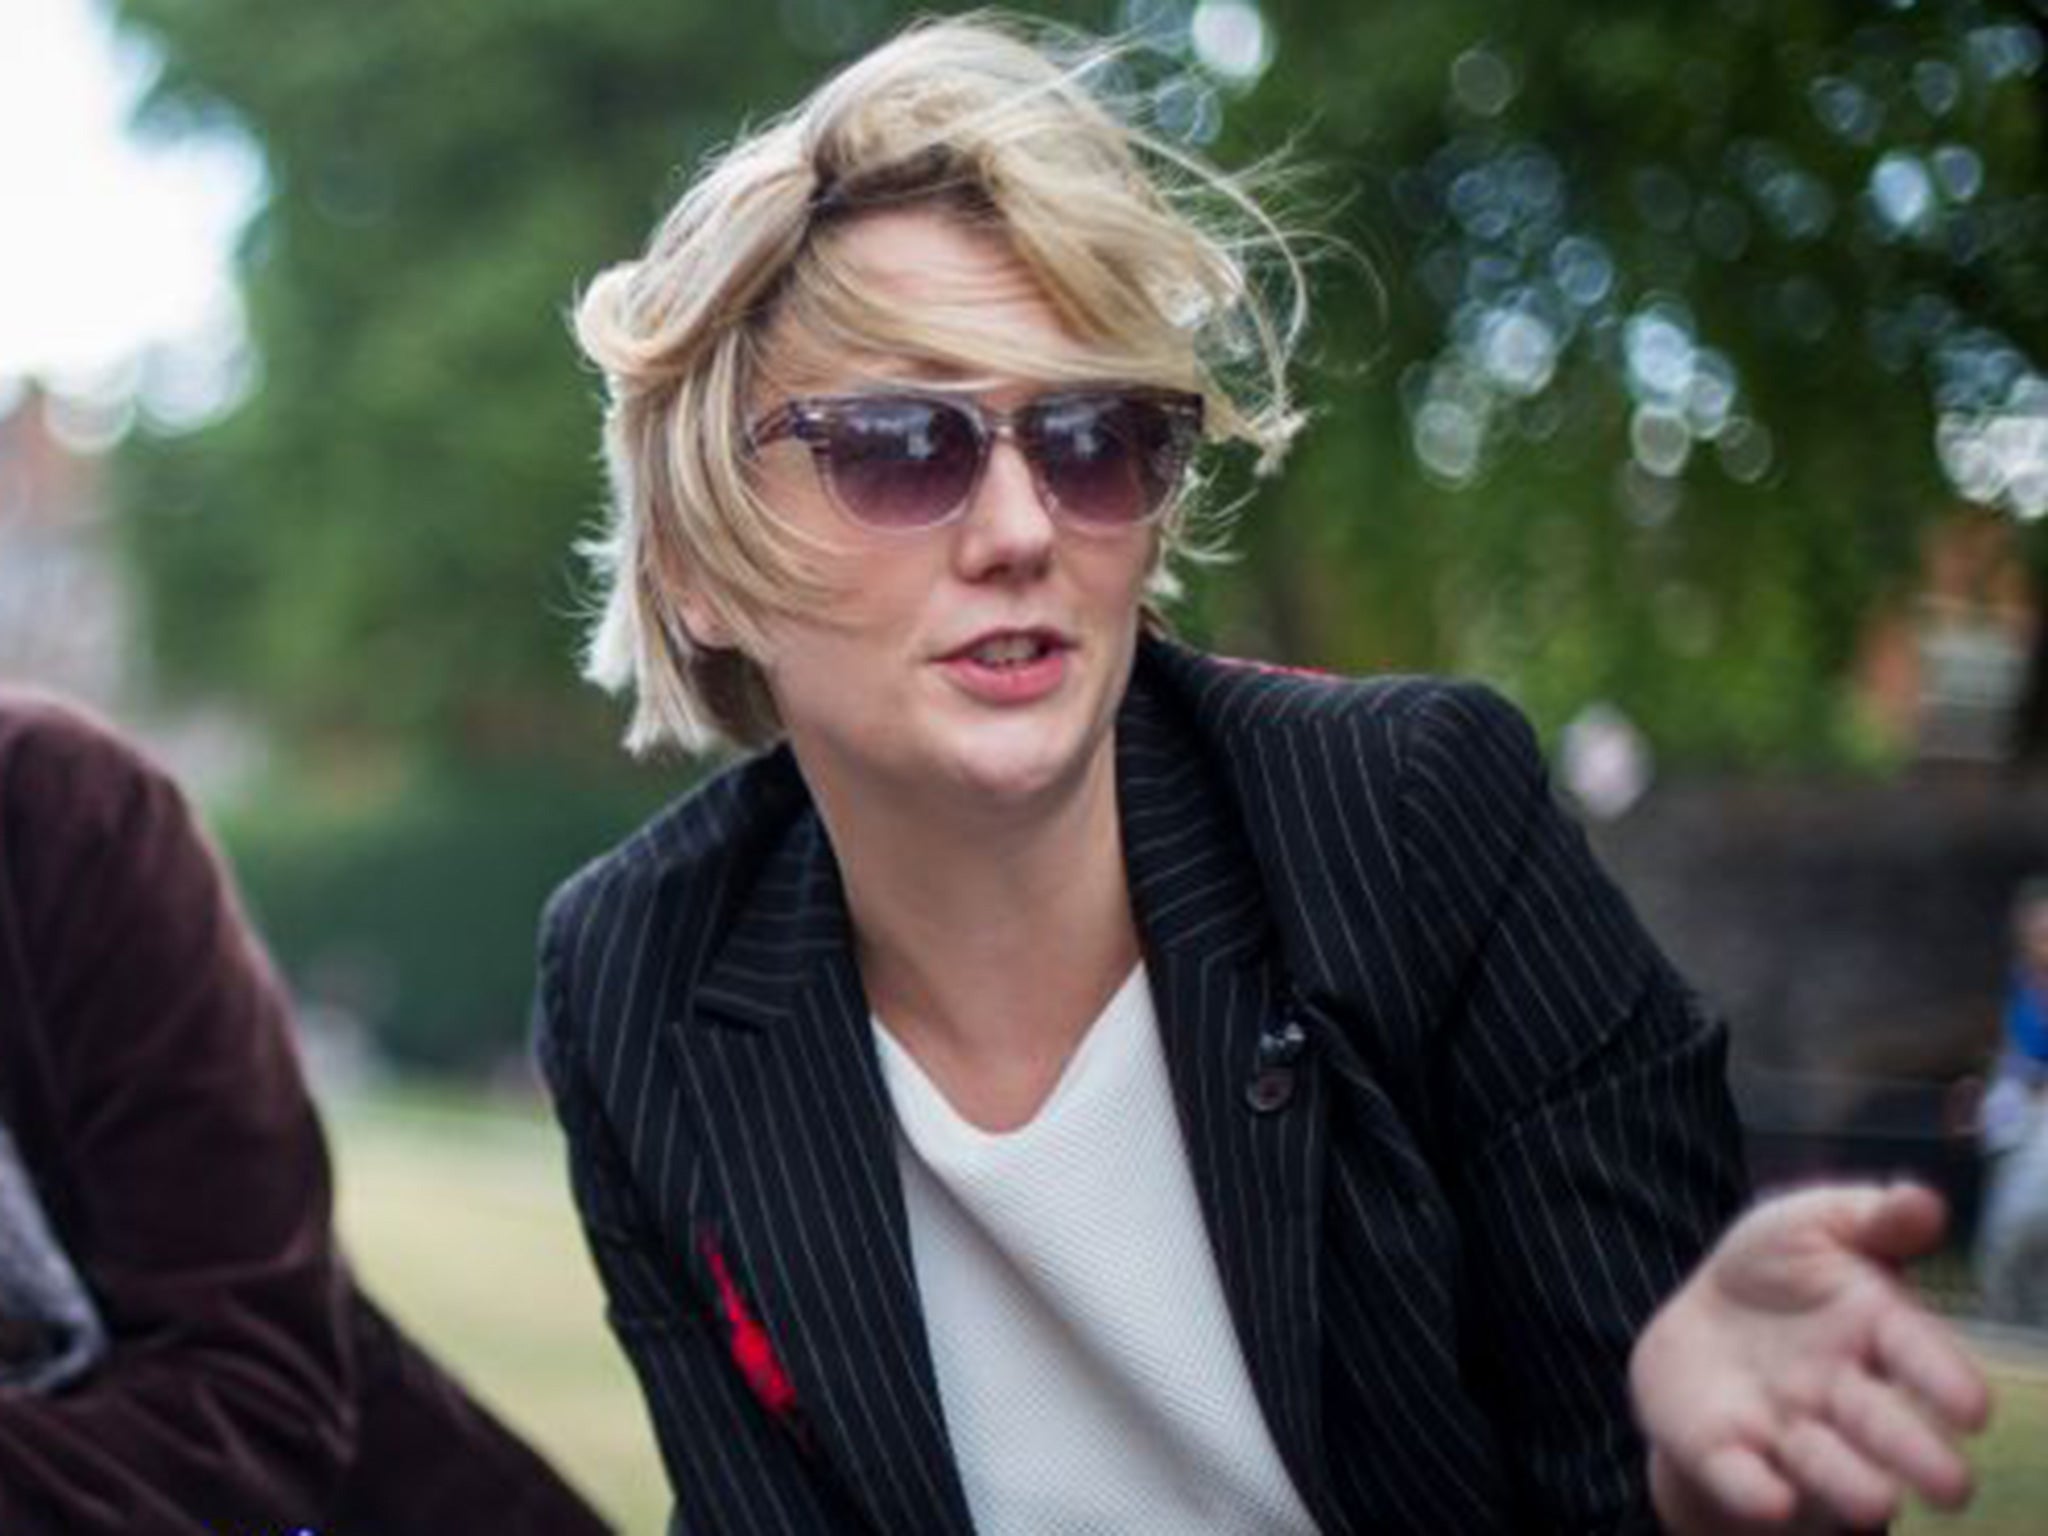 Stella Creasy has previously been subject to harassment